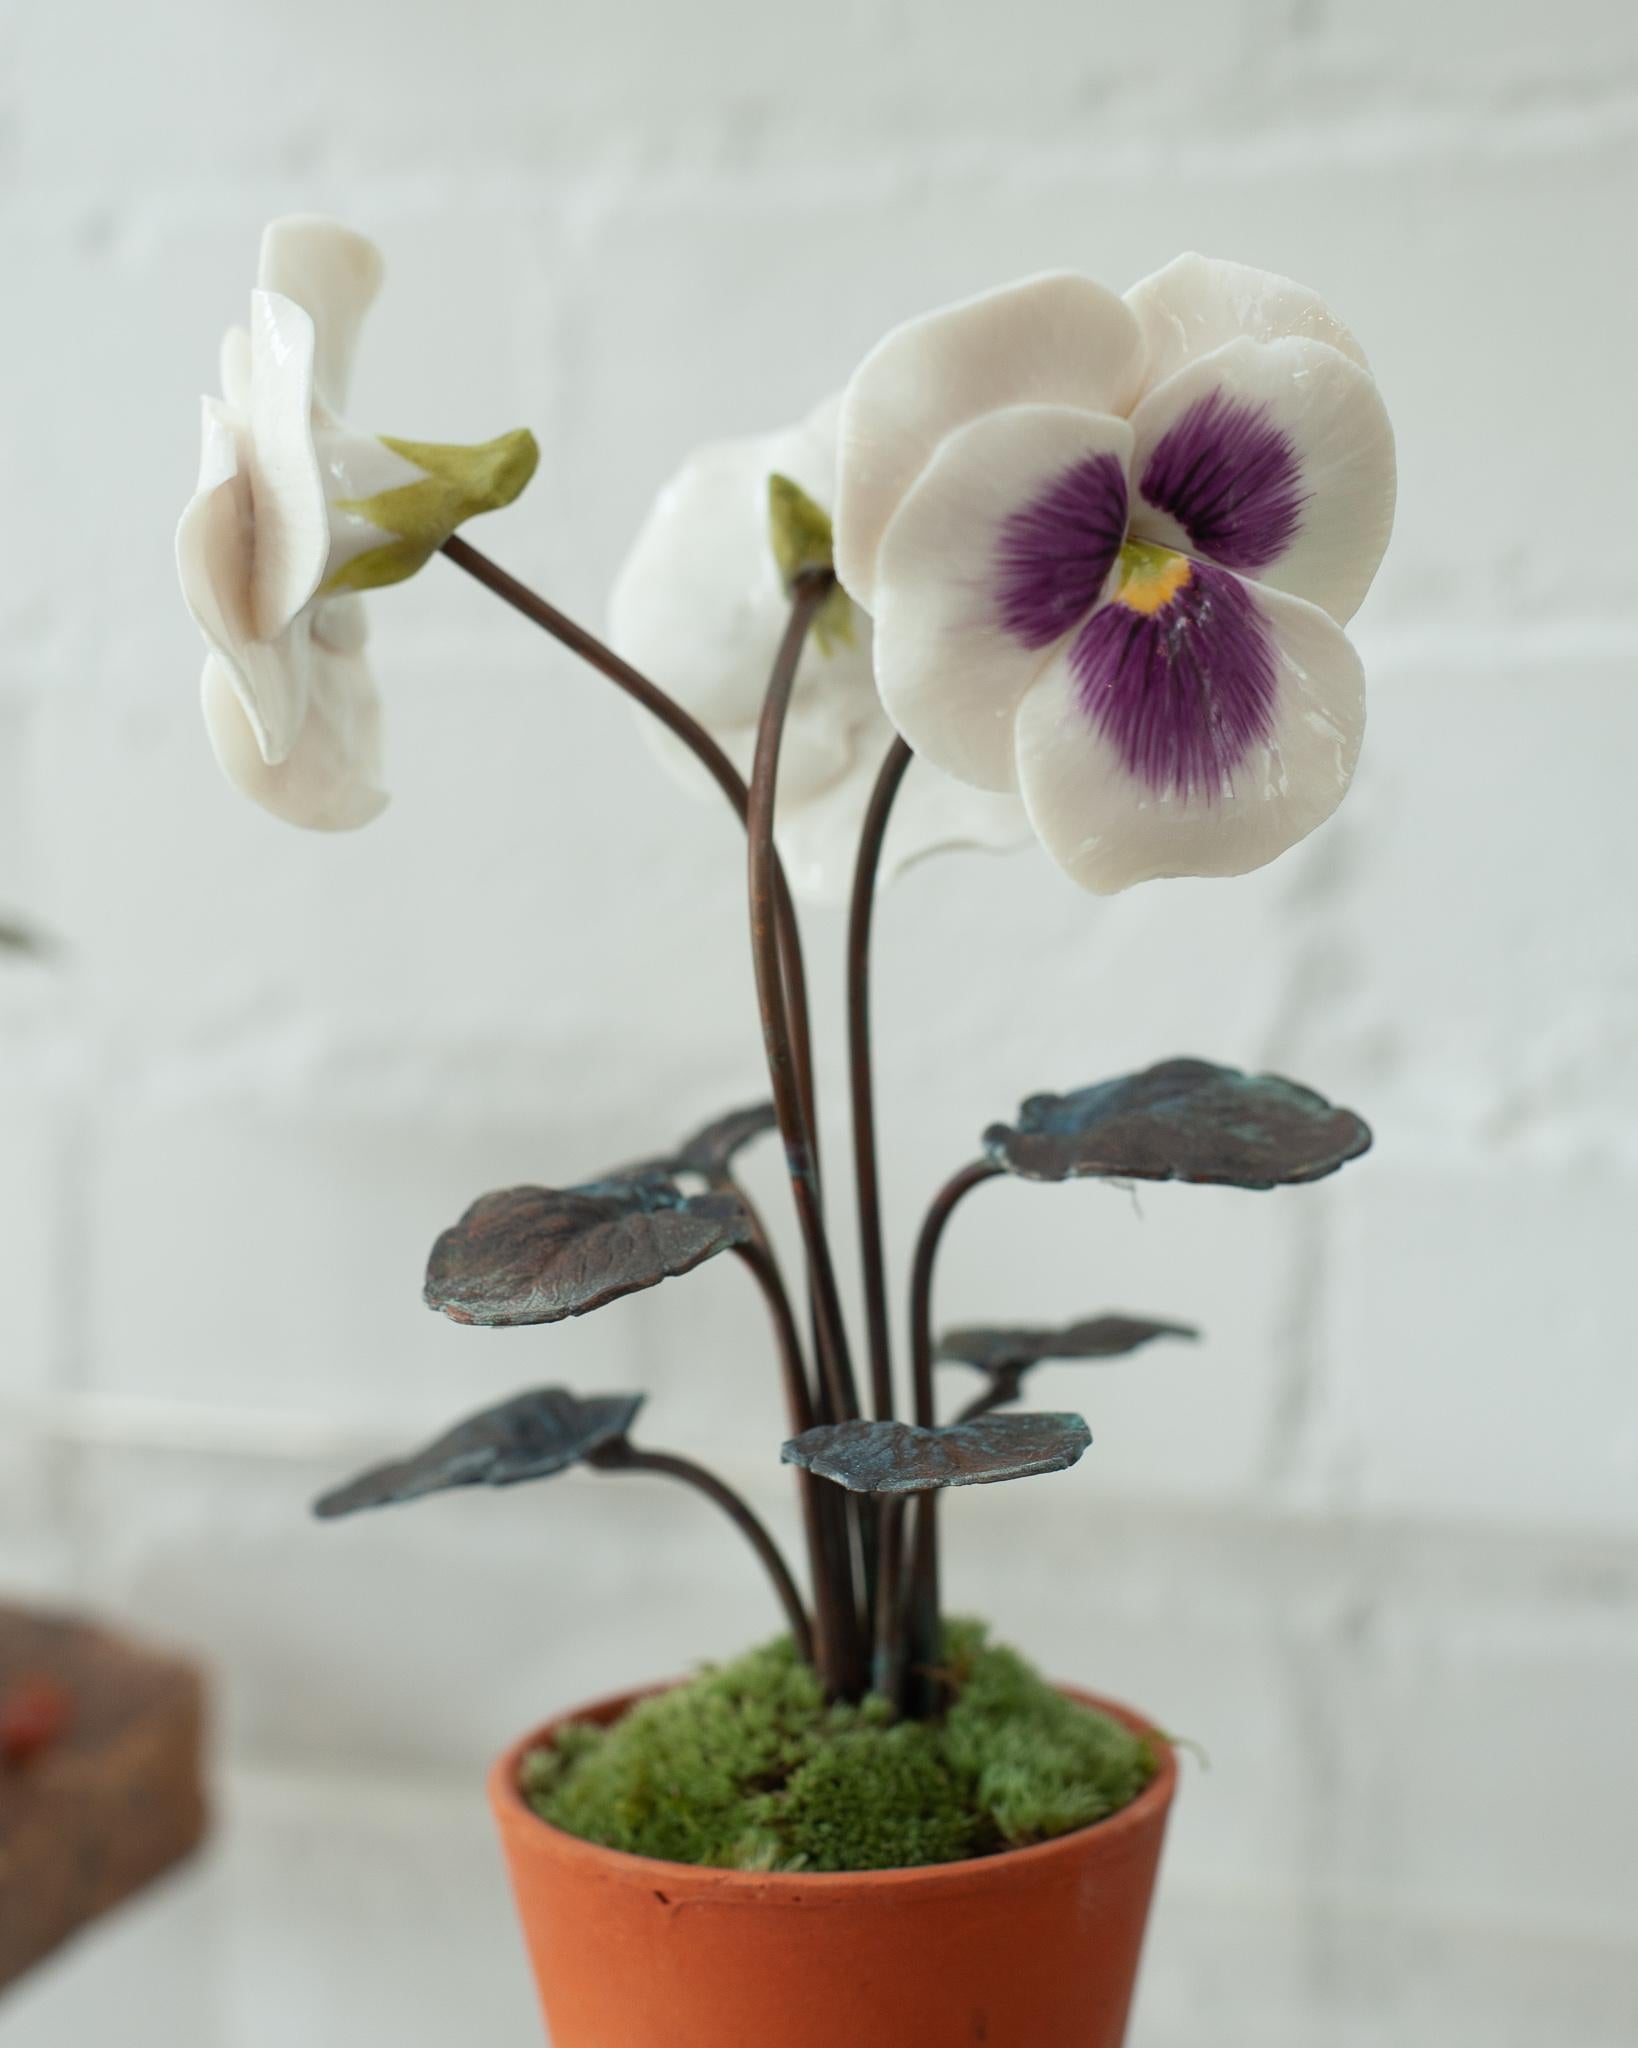 Enhance your table with these delicate porcelain flowers by French artist Samuel Mazy, exclusive to Maison Nurita in Canada. Mazy has been working as a ceramist for nearly 20 years in Paris. He sculpts porcelain flowers to create poetic floral